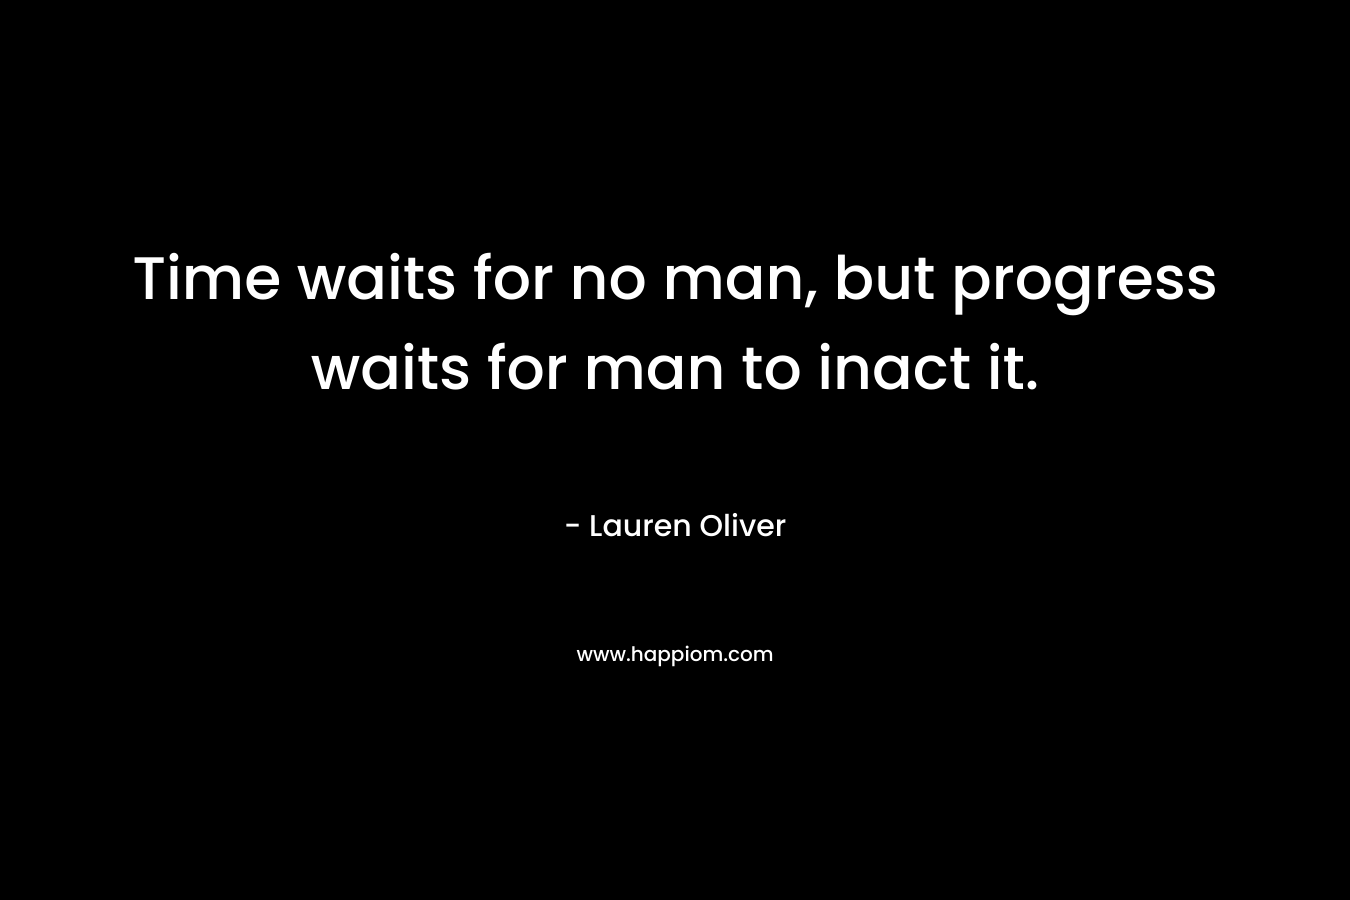 Time waits for no man, but progress waits for man to inact it. – Lauren Oliver